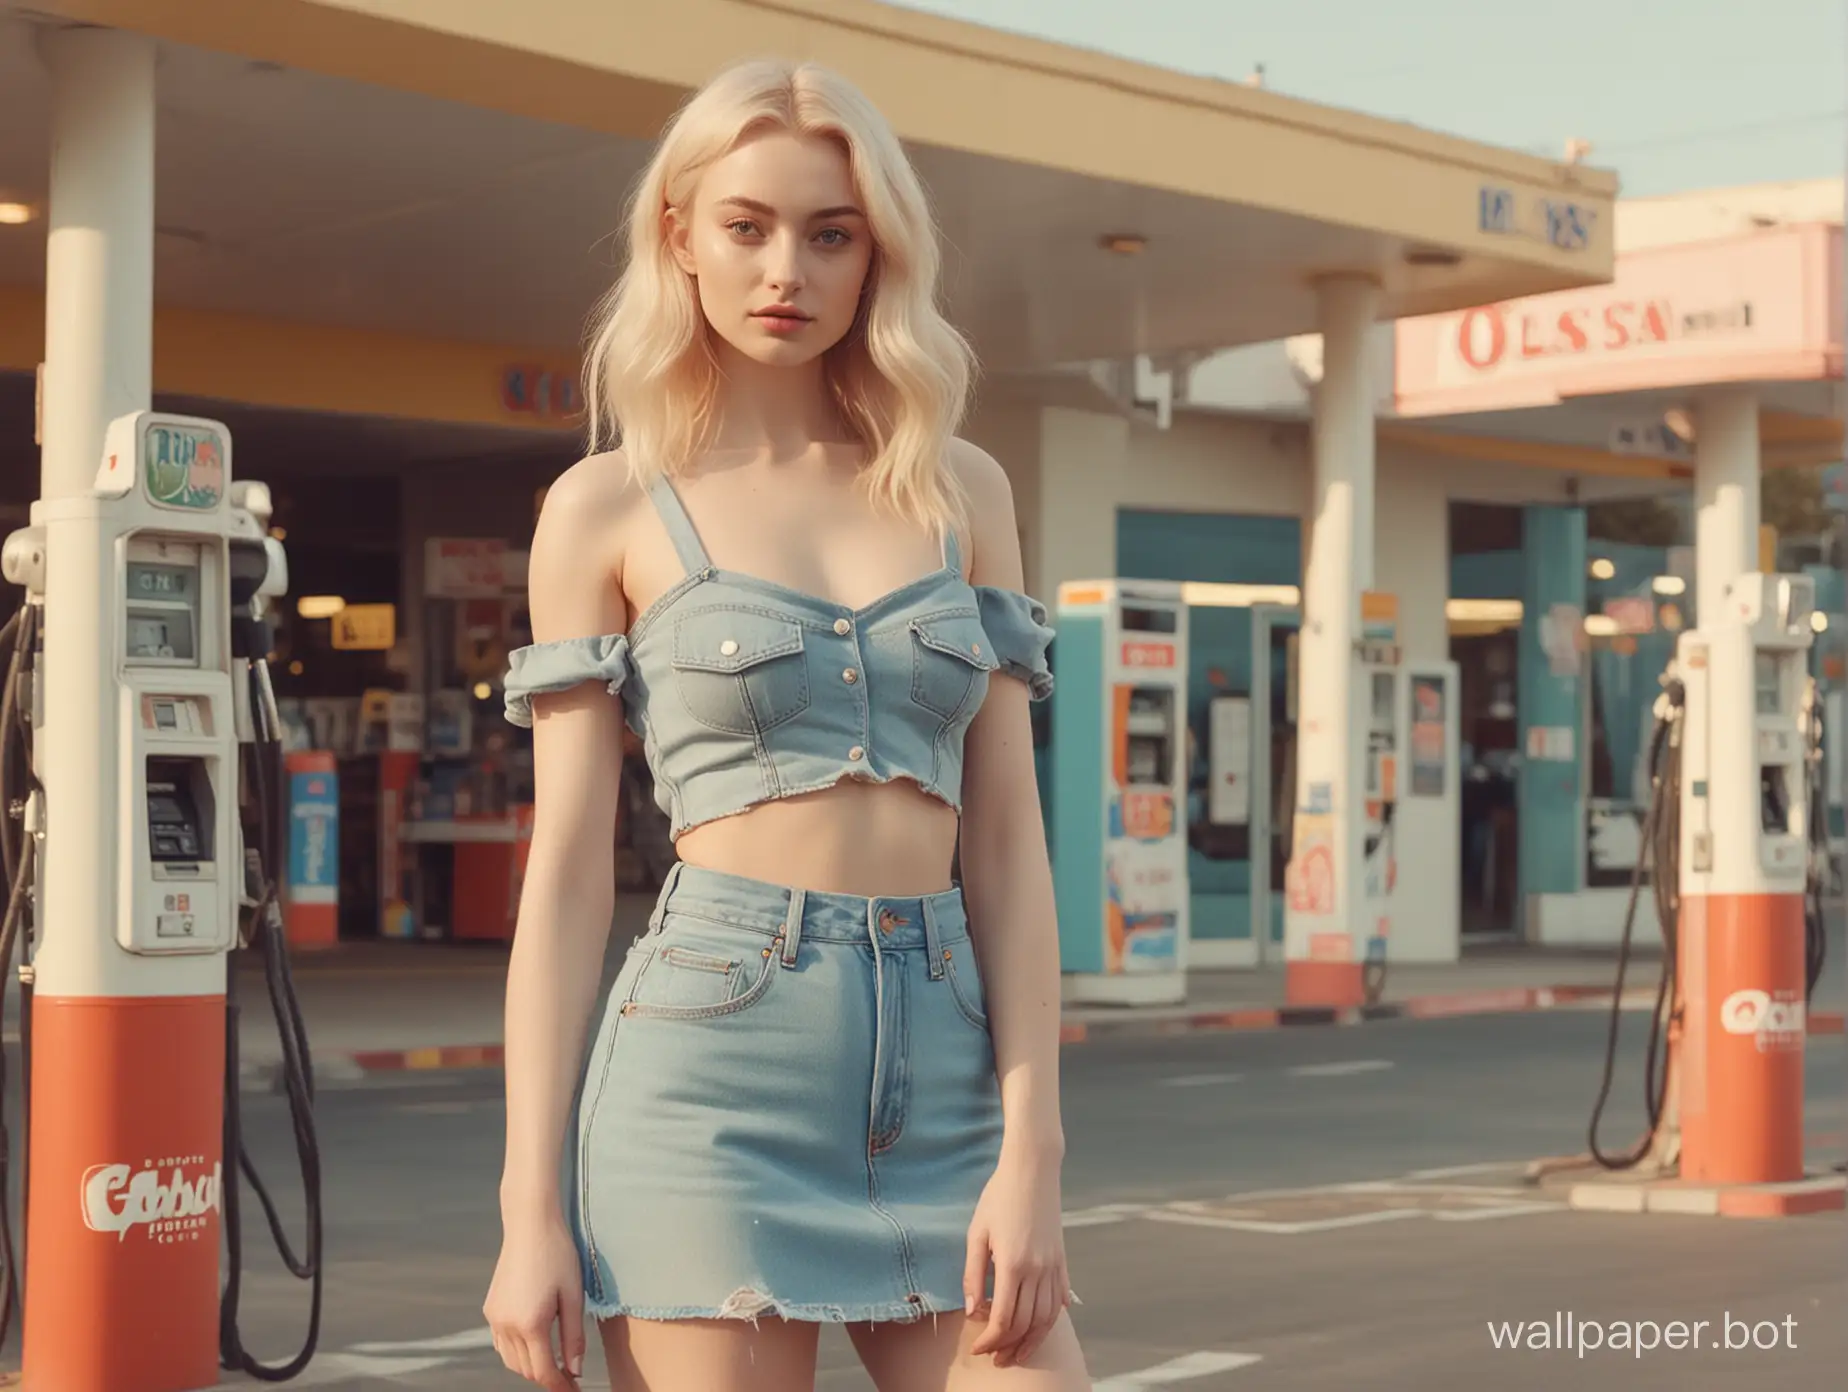 Fashionable-Woman-at-Gas-Station-Stylish-Pose-in-Mini-Cropped-Top-and-Miniskirt-Jeans